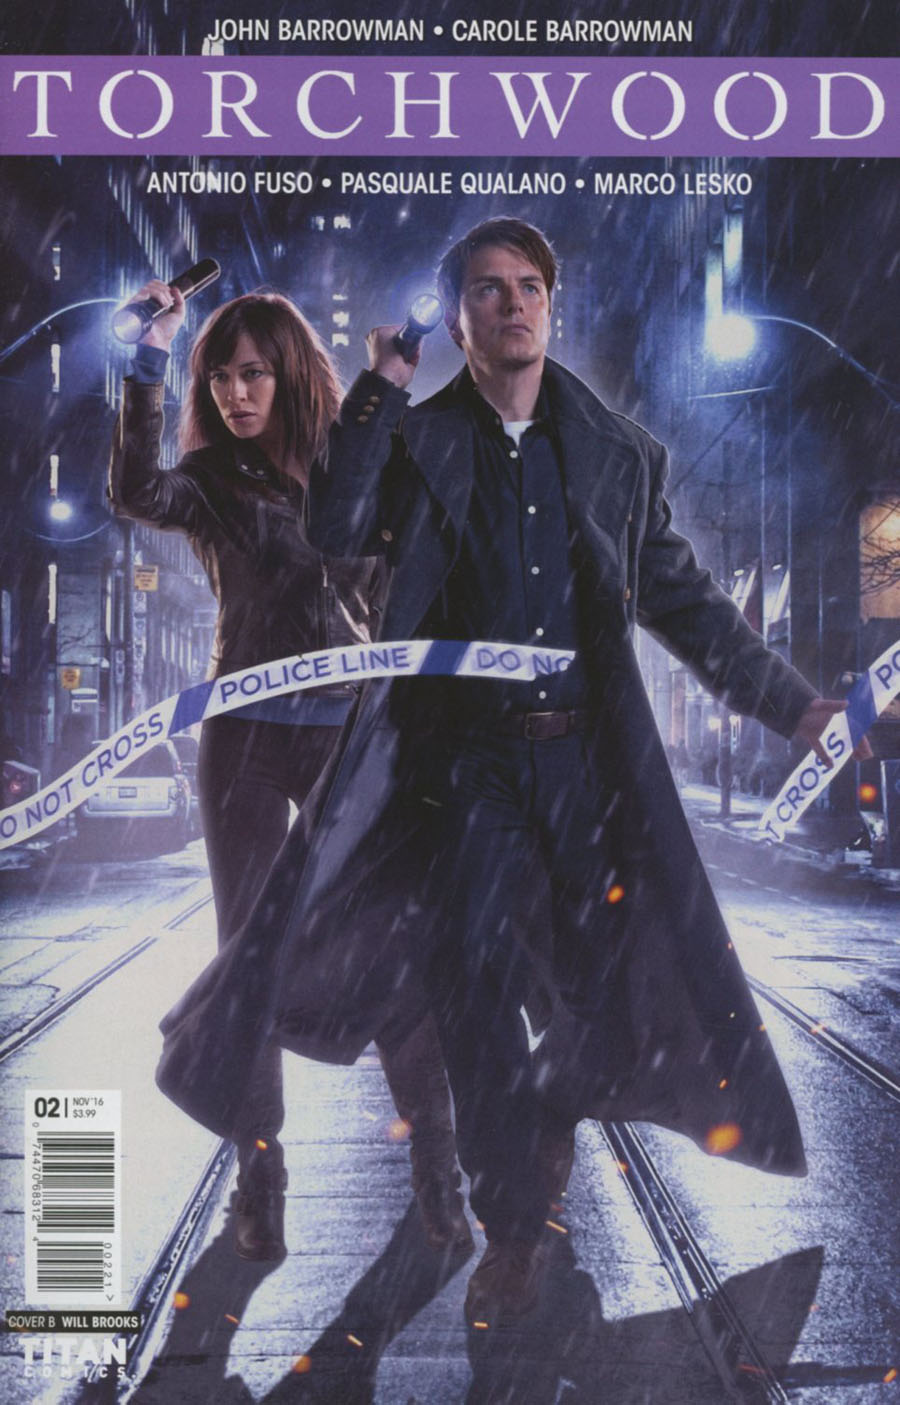 Torchwood Vol 2 #2 Cover B Variant Photo Cover